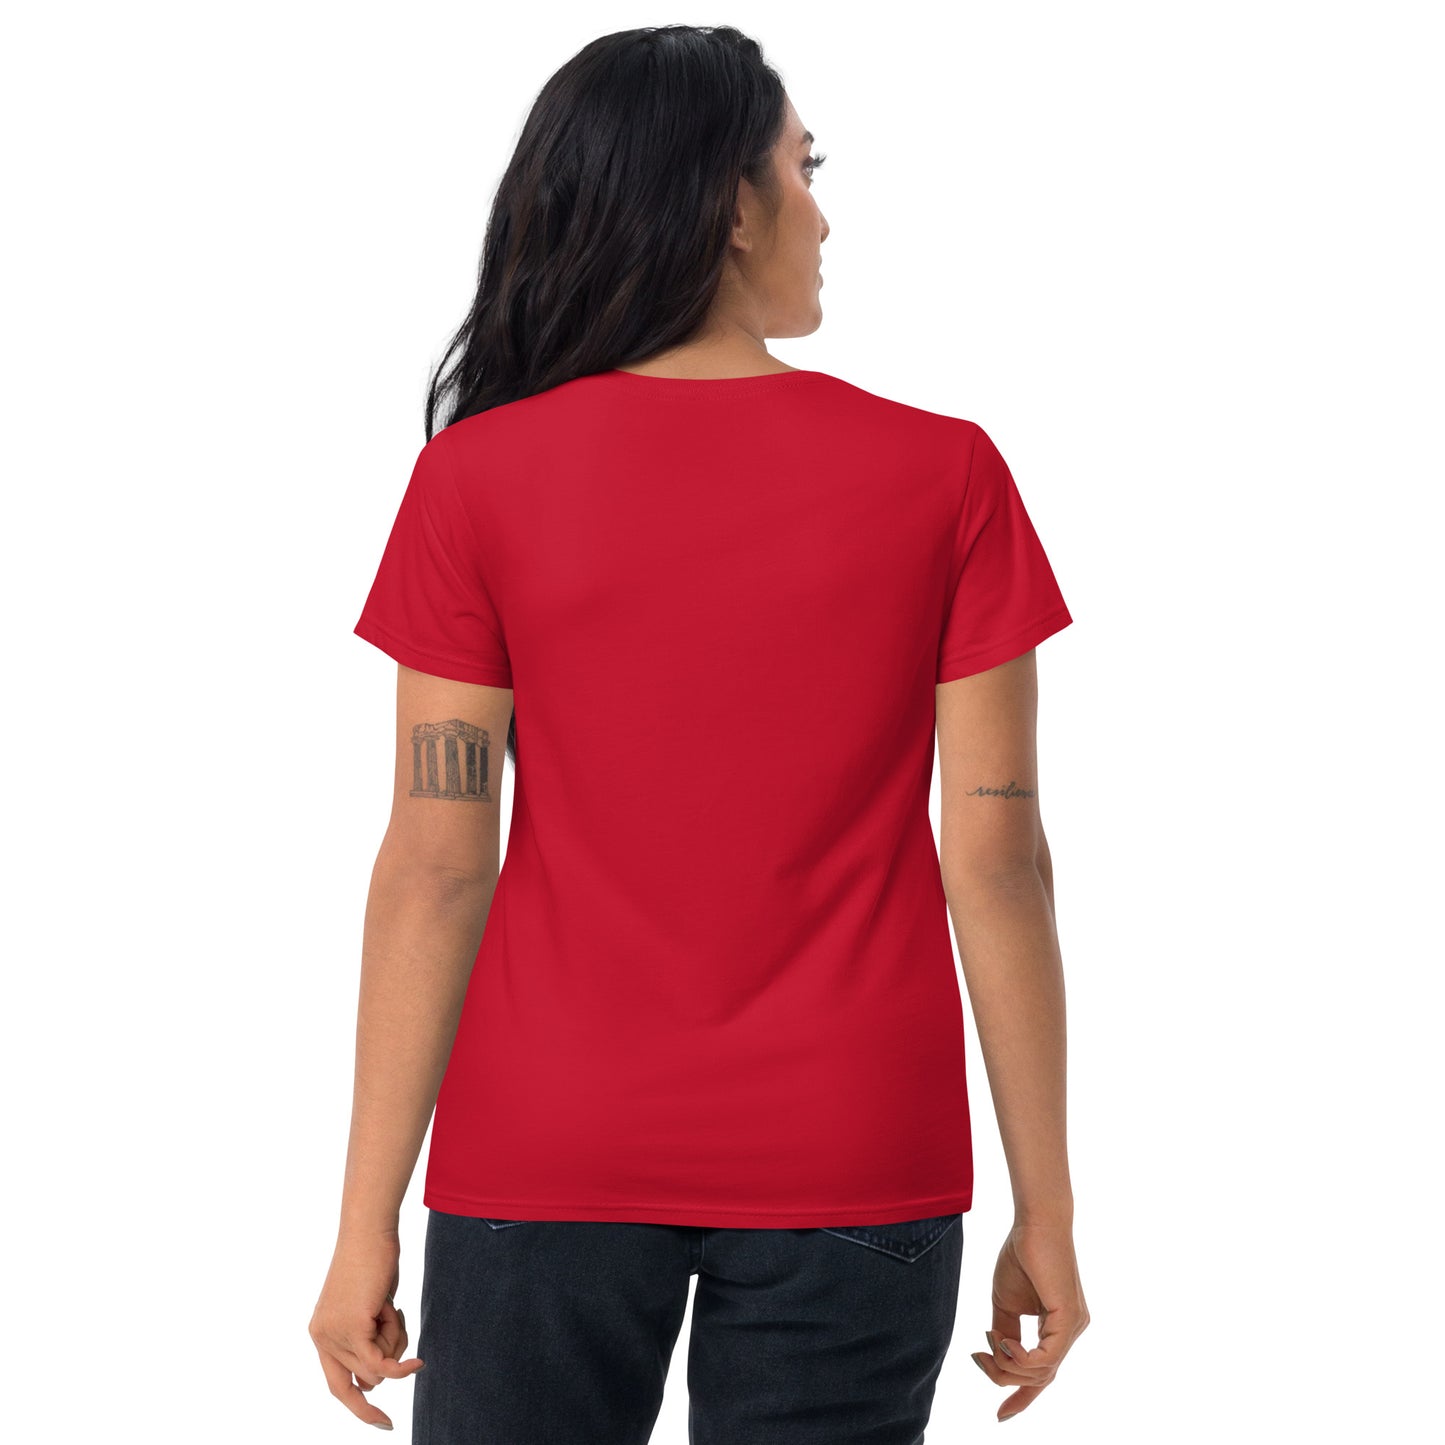 Look the other way - Women's T-shirt